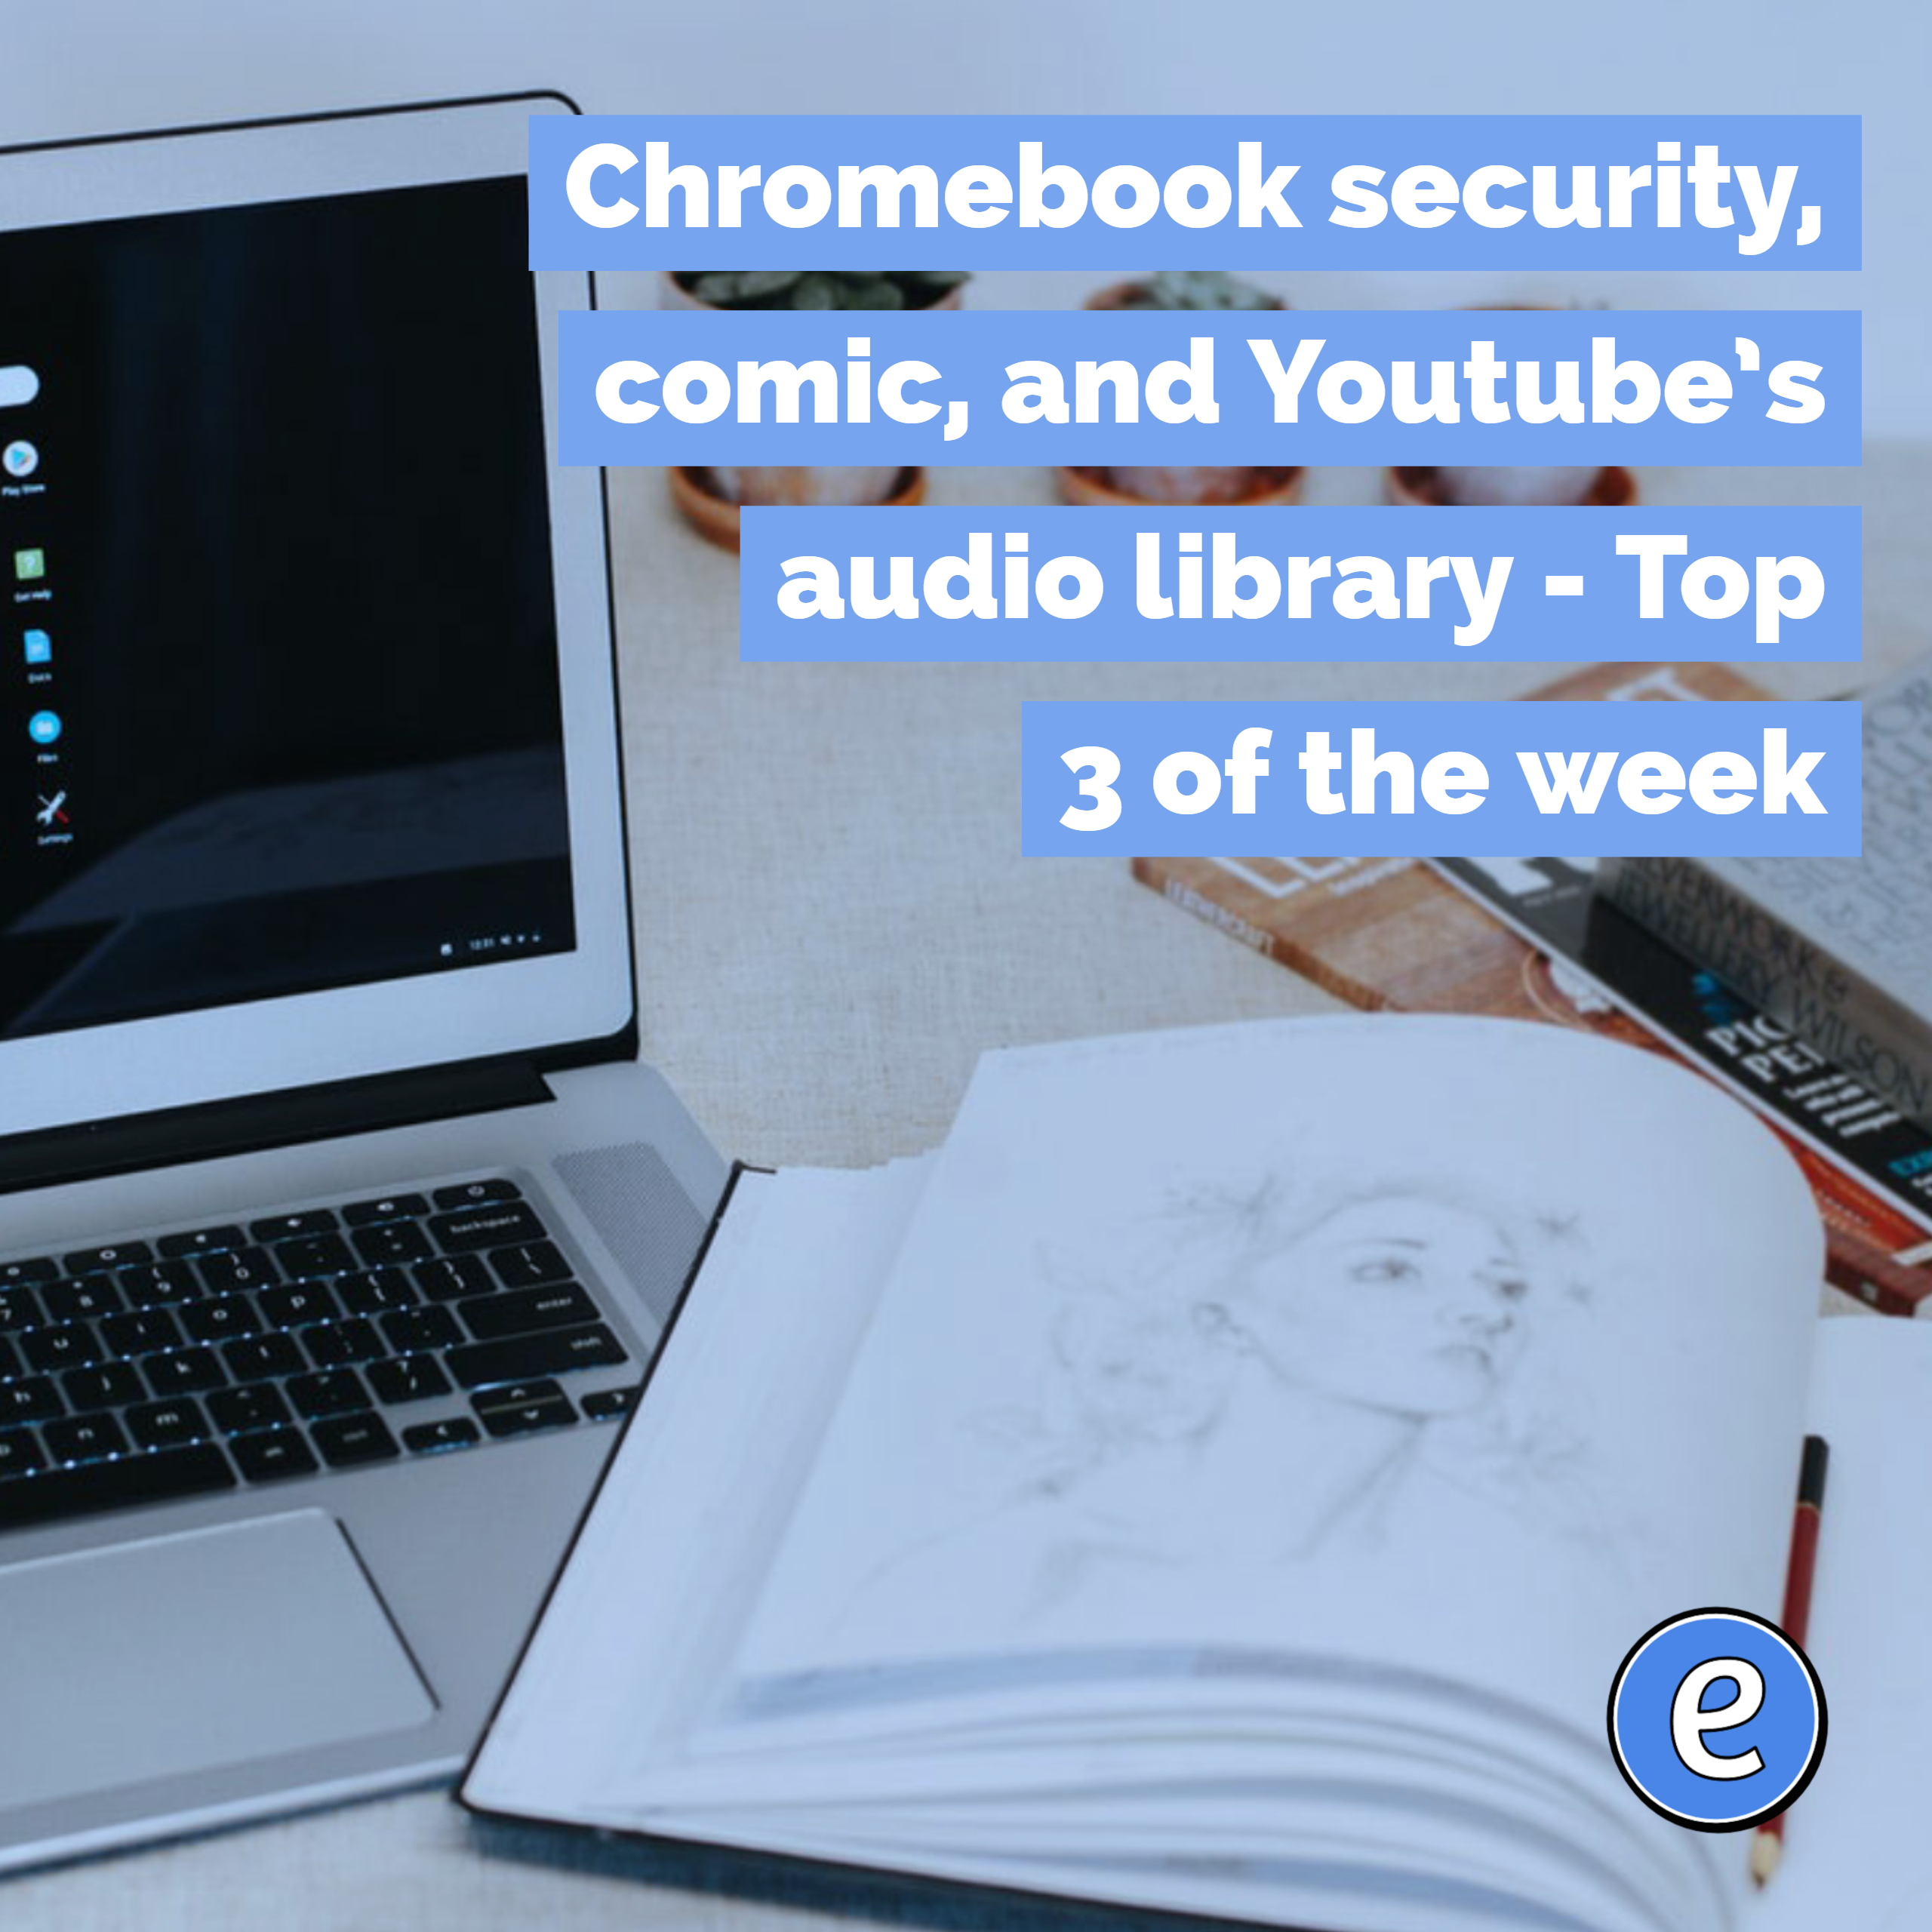 Chromebook security, comic, and Youtube’s audio library – Top 3 of the week